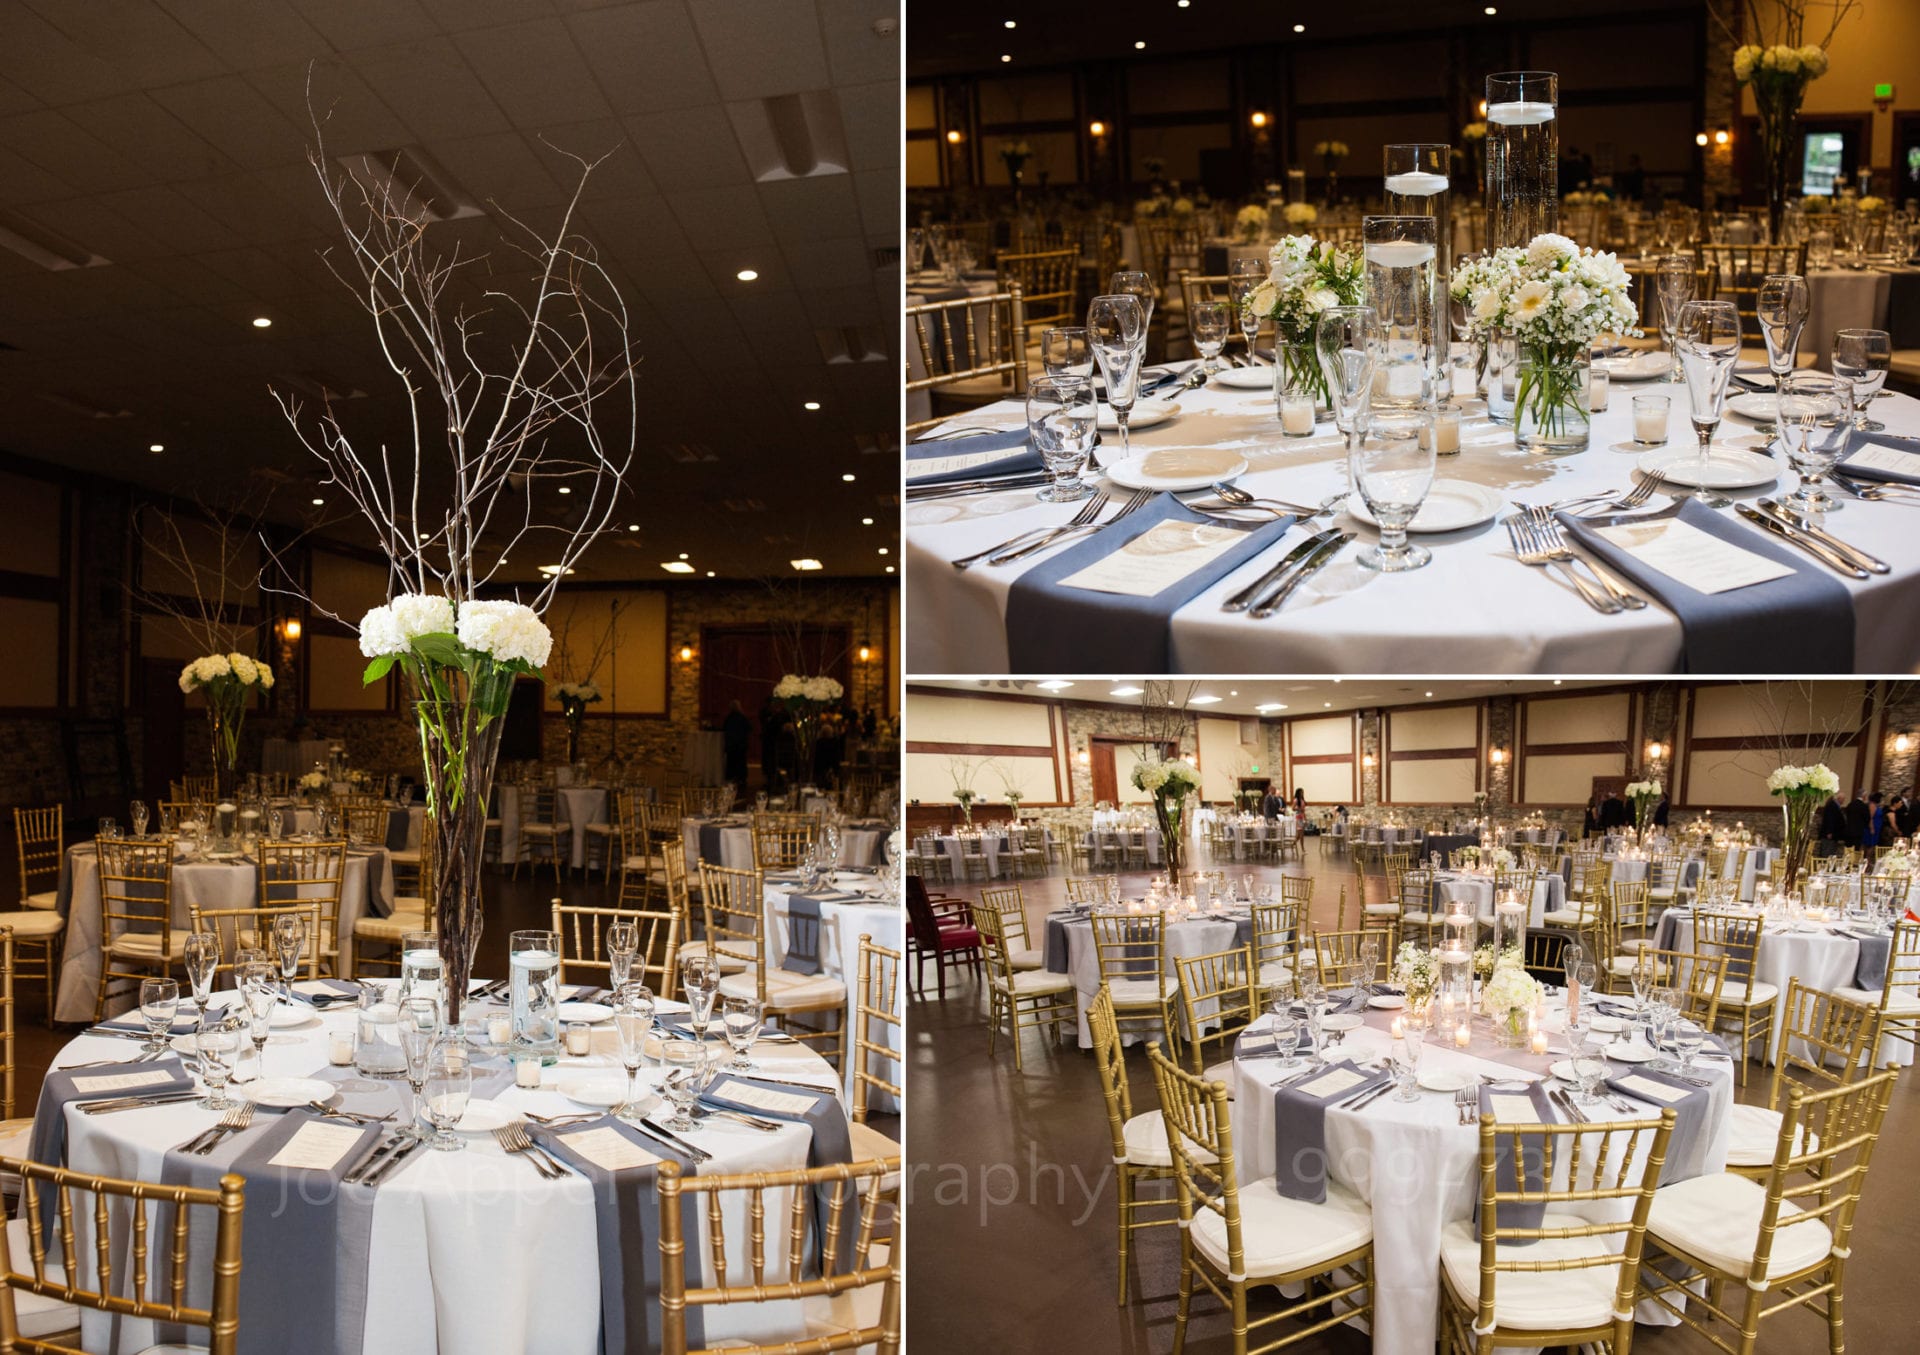 centerpieces with white branches and flowers sit on white tables with gray napkins Seven Springs Weddings